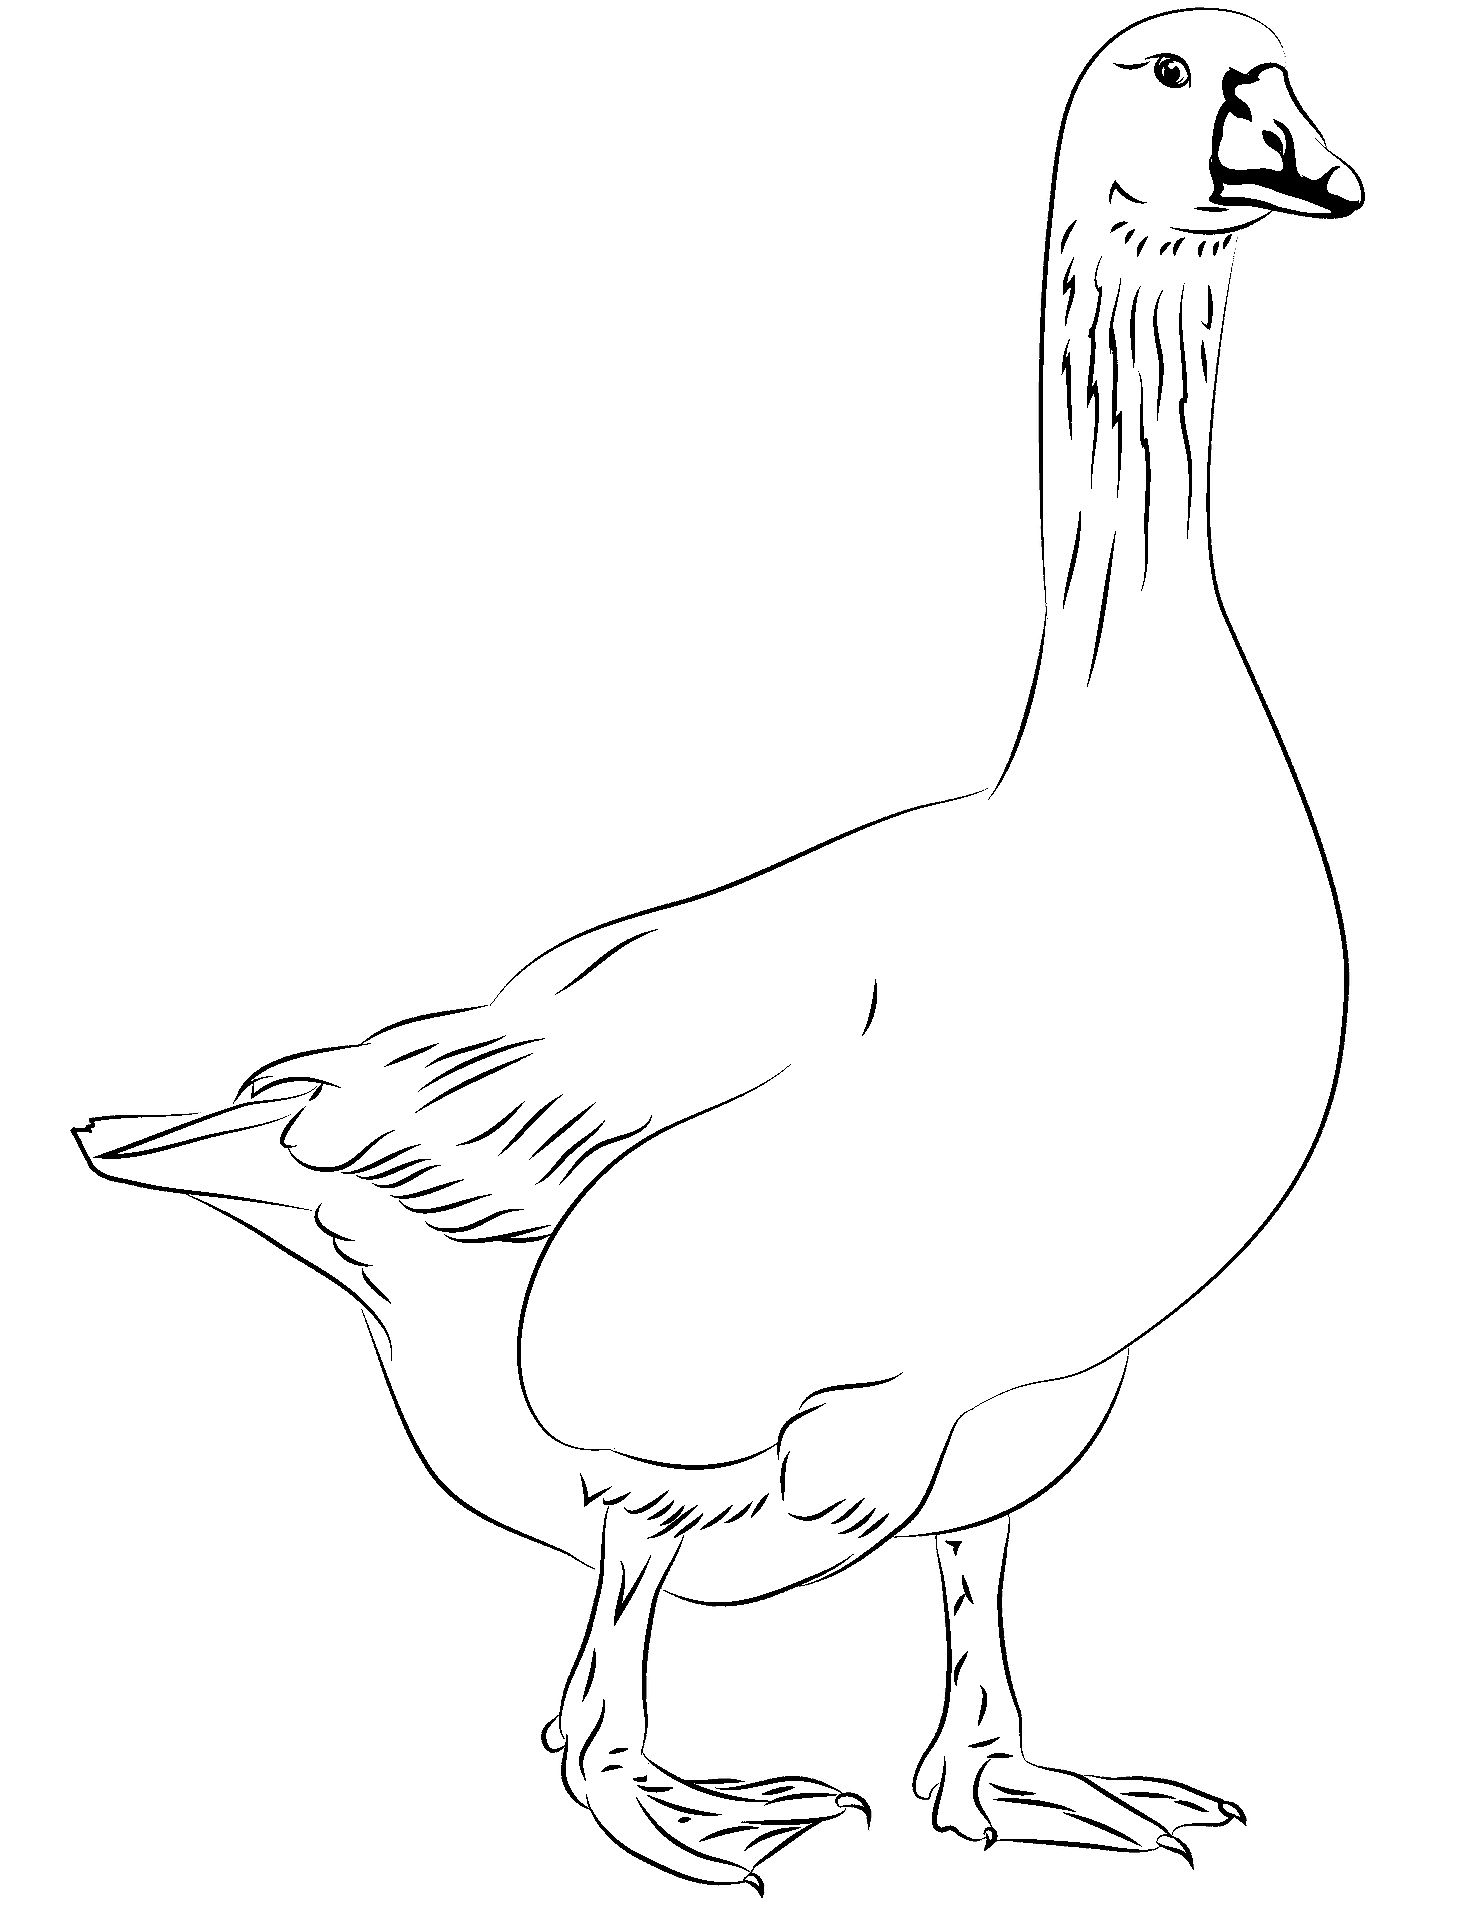 Coloring page of a goose